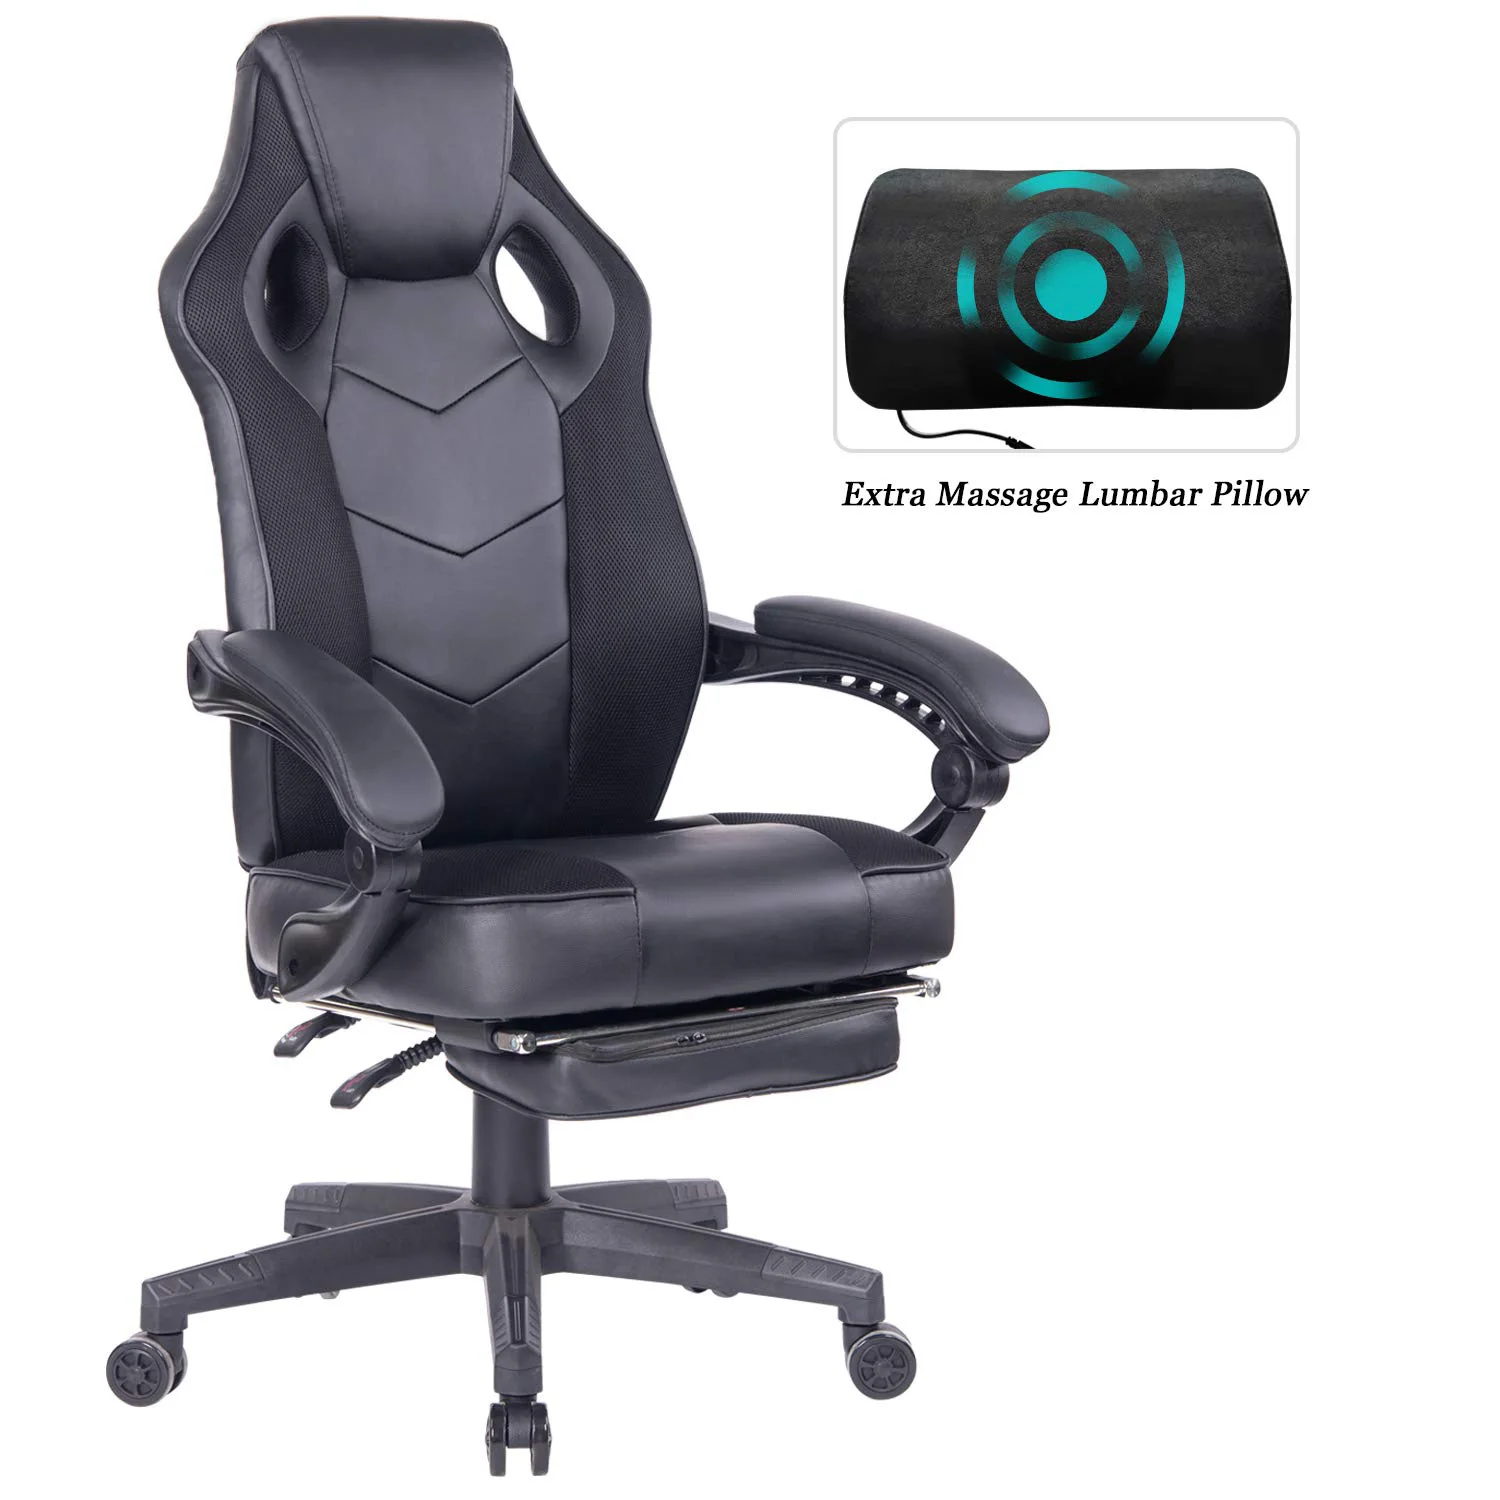 Lie Down Low Price Comfortable Blue Silla Gamer Reclining Computer Footrest Gaming Pc Chair Scorpion Buy Silla Gaming Scorpion Gaming Chair Silla Gamer Product On Alibaba Com